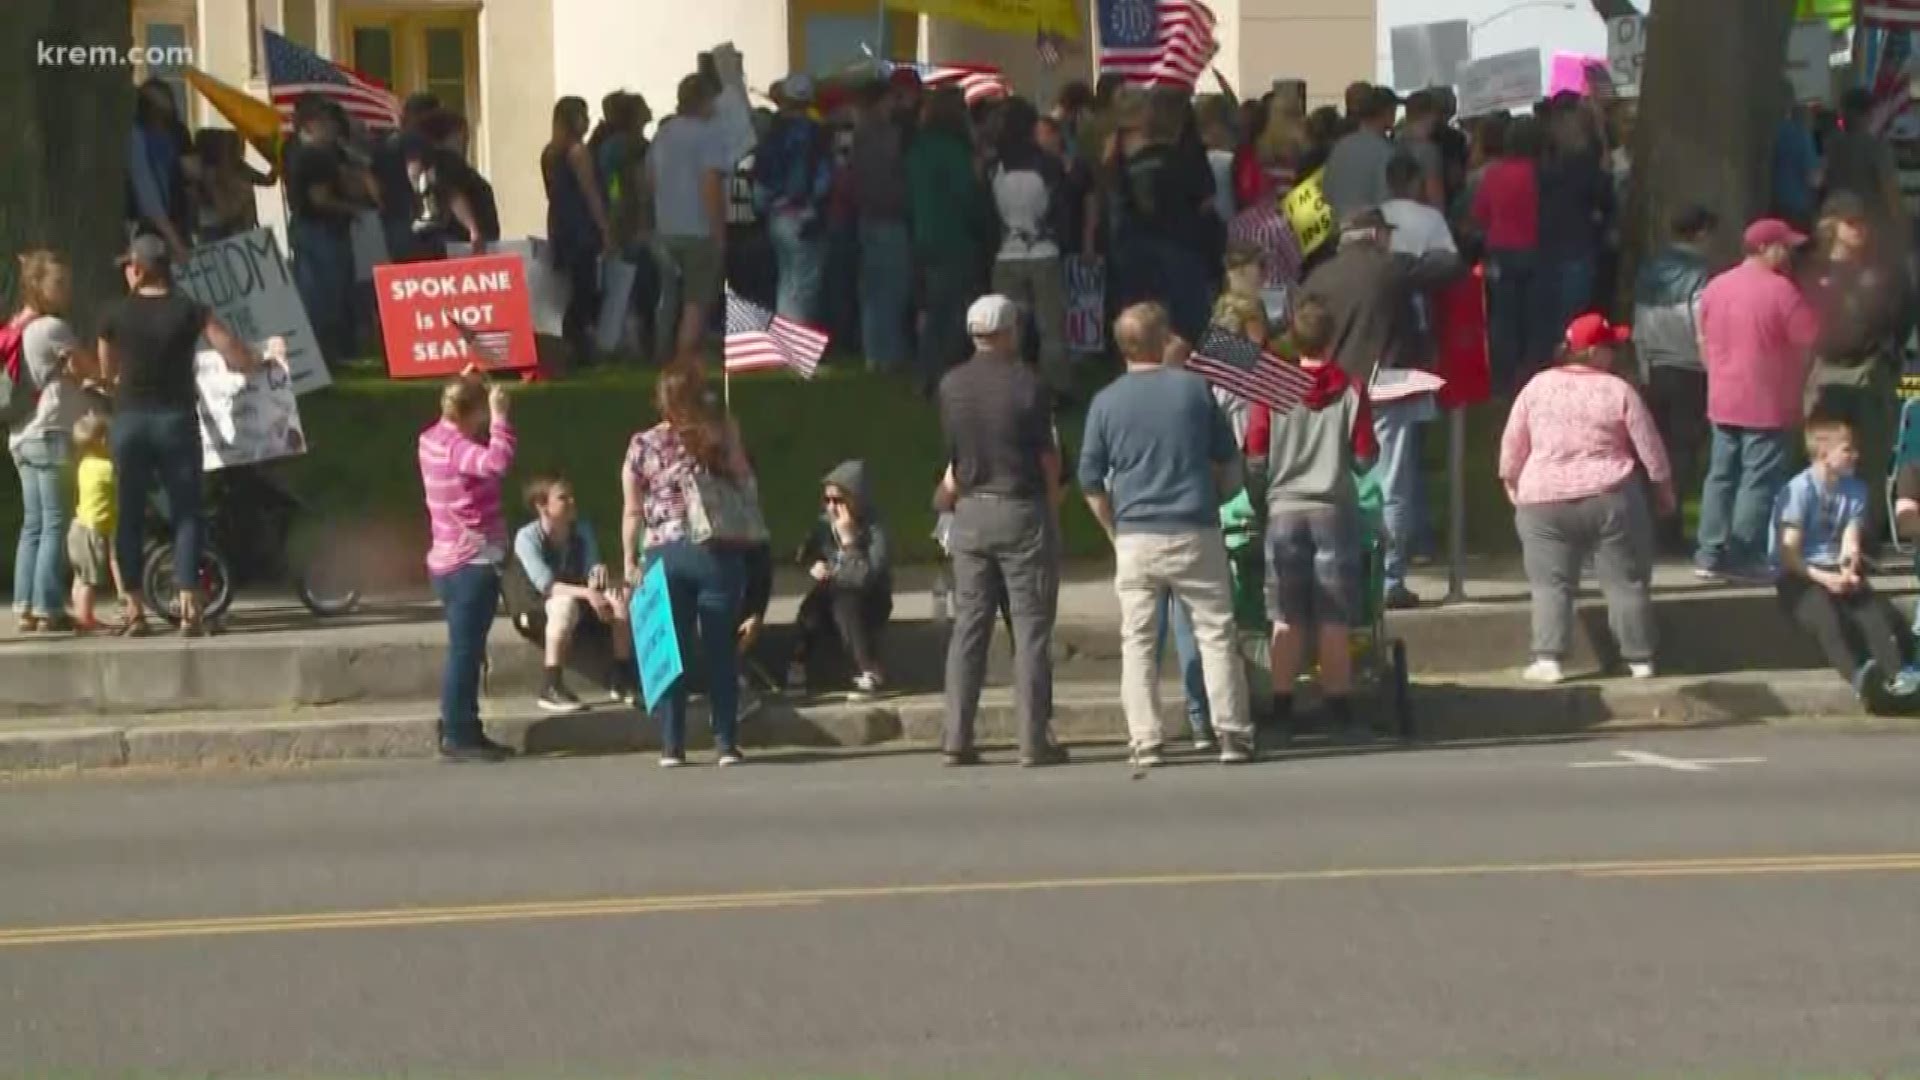 Speakers and protesters attending the rally, including Spokane Valley Rep. Matt Shea, chanted, "Freedom is the cure."